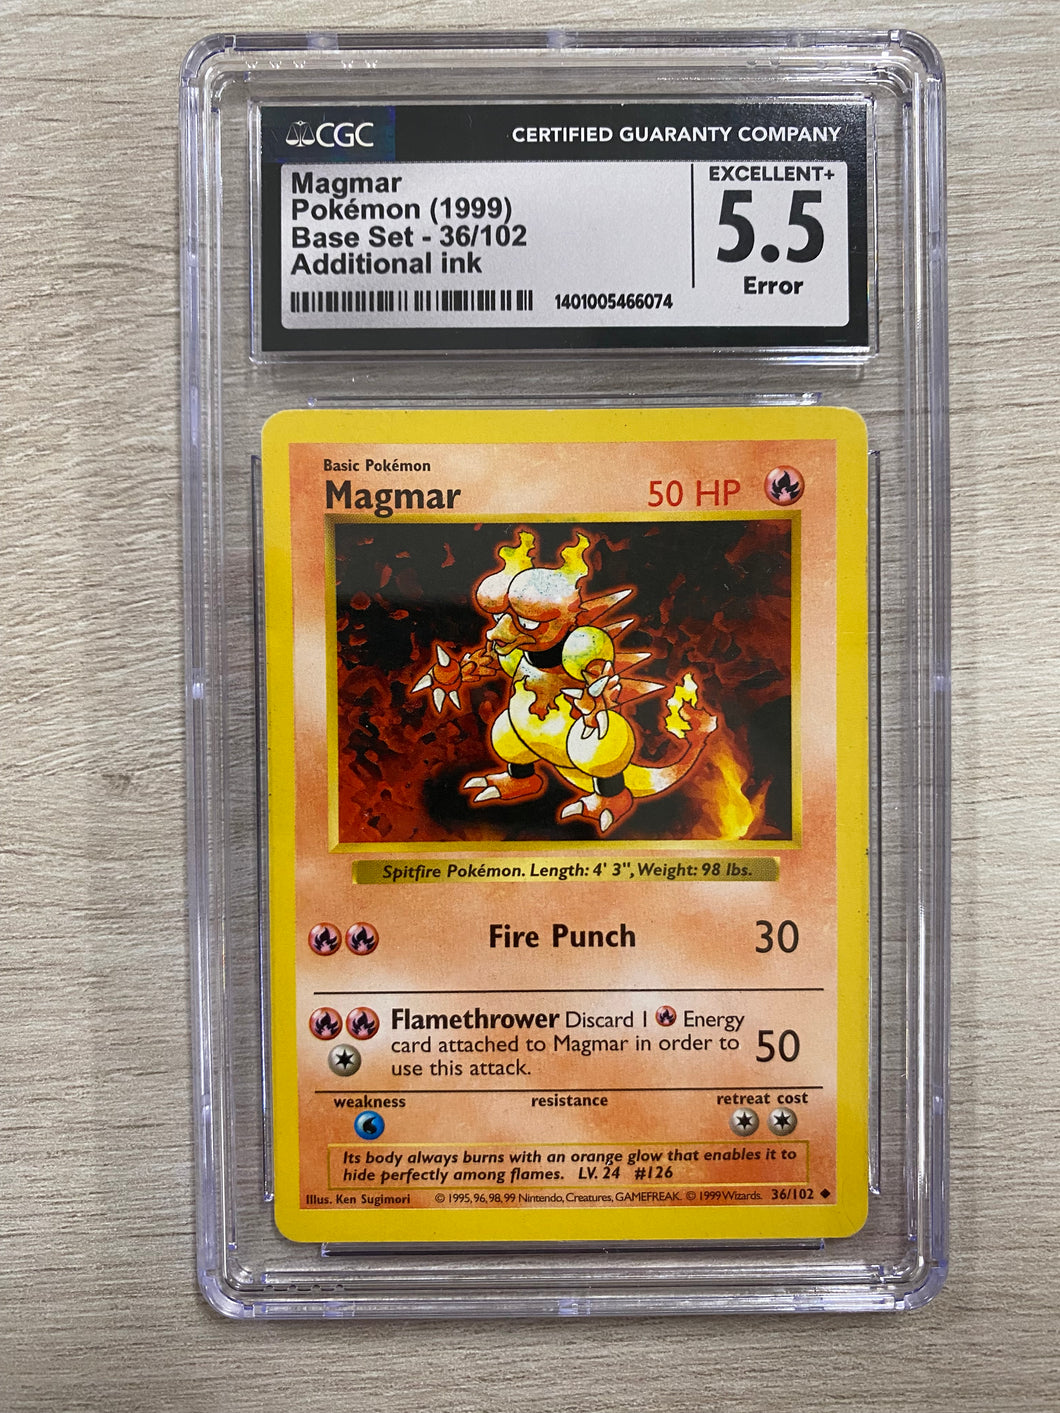 [ERROR] Magmar - 36/102 - CGC 5.5 - Additional ink (blue flame) - Uncommon - Base set - Shadowless [Exc]